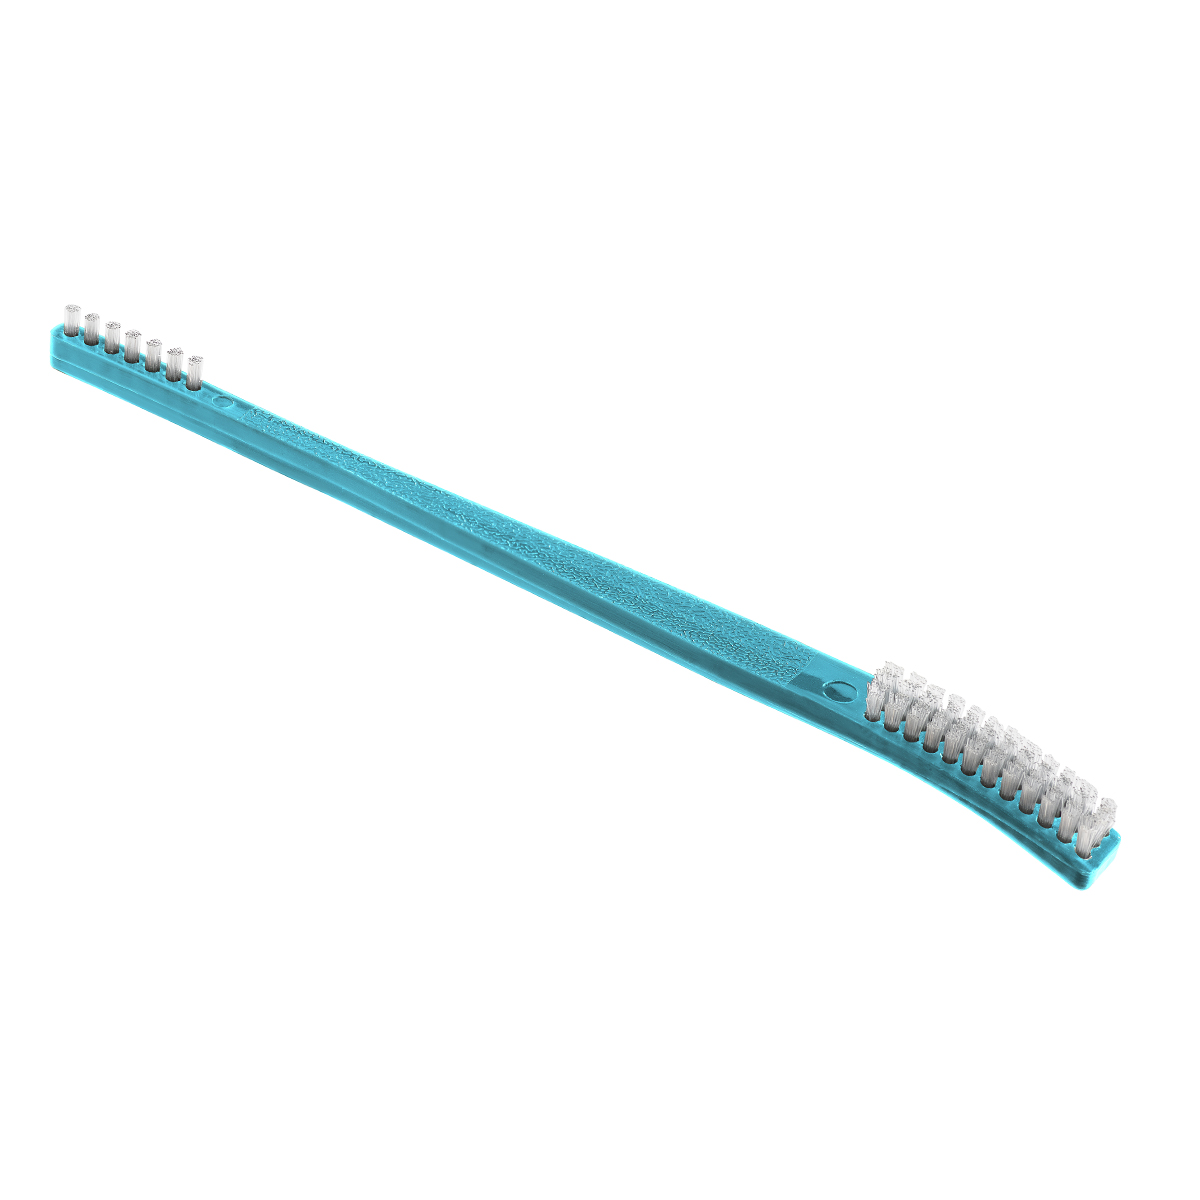 Toothbrush Style Cleaning Brush Image